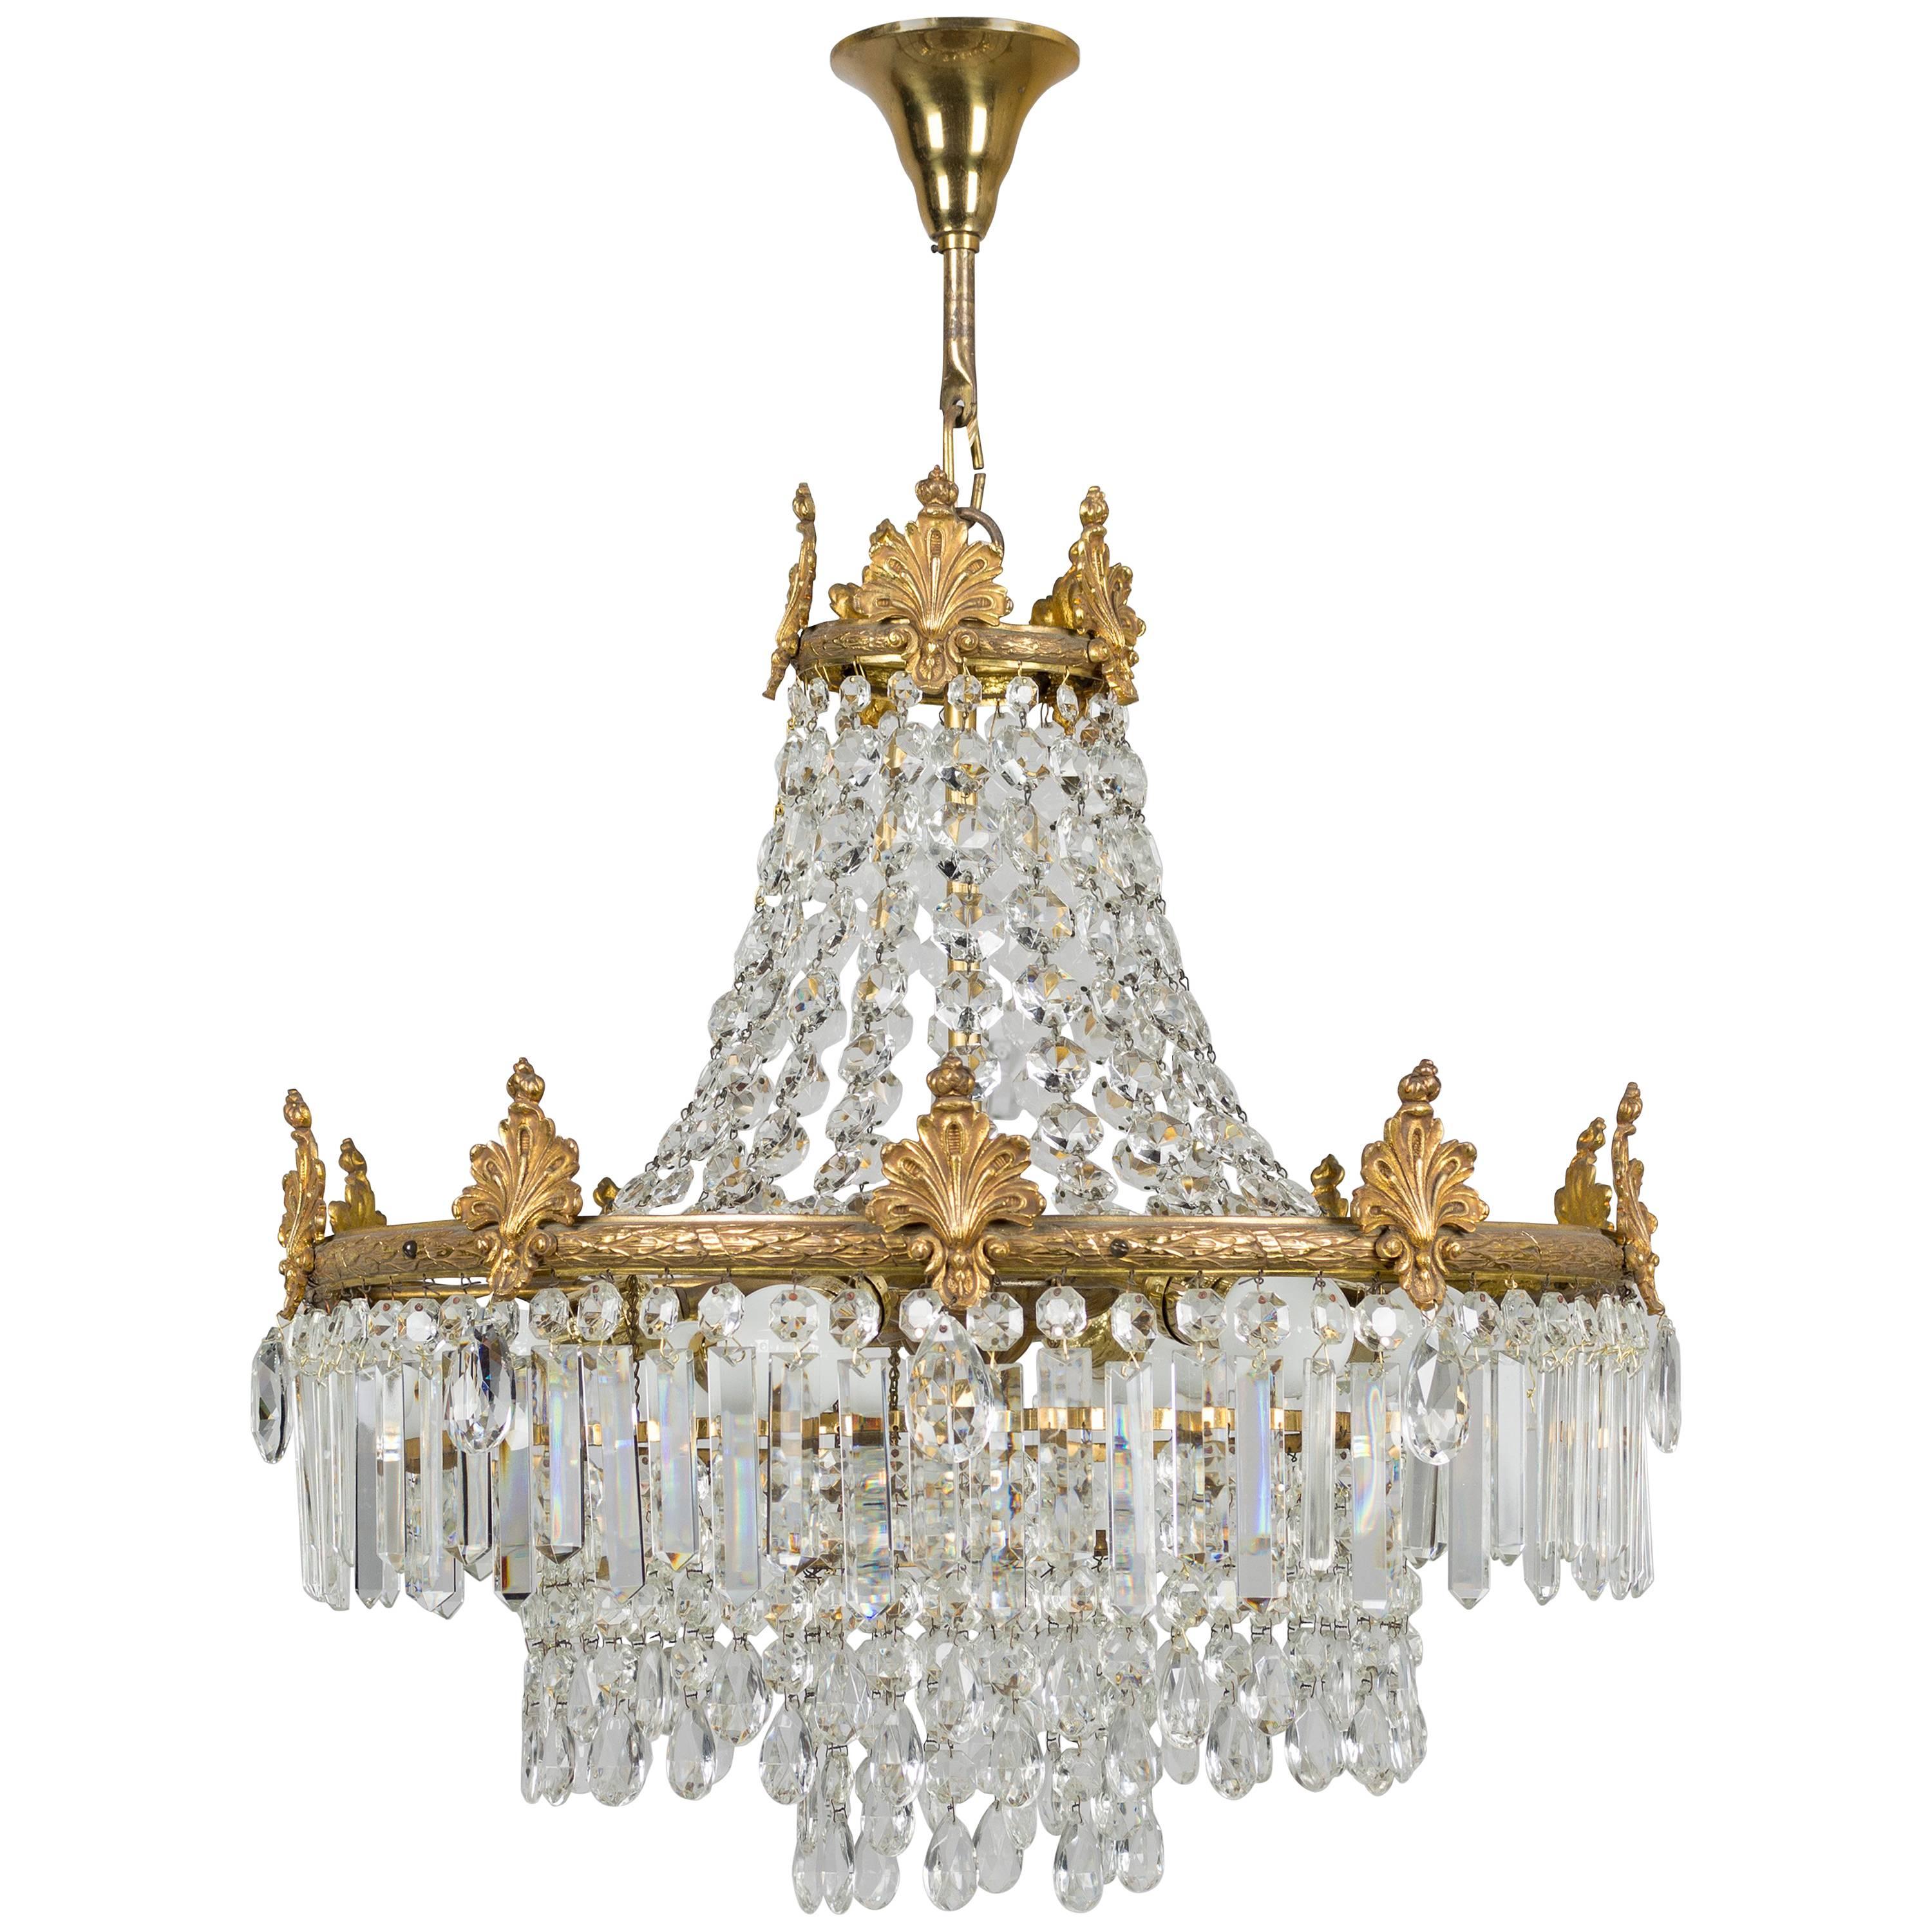 French Empire Style Crystal Chandelier